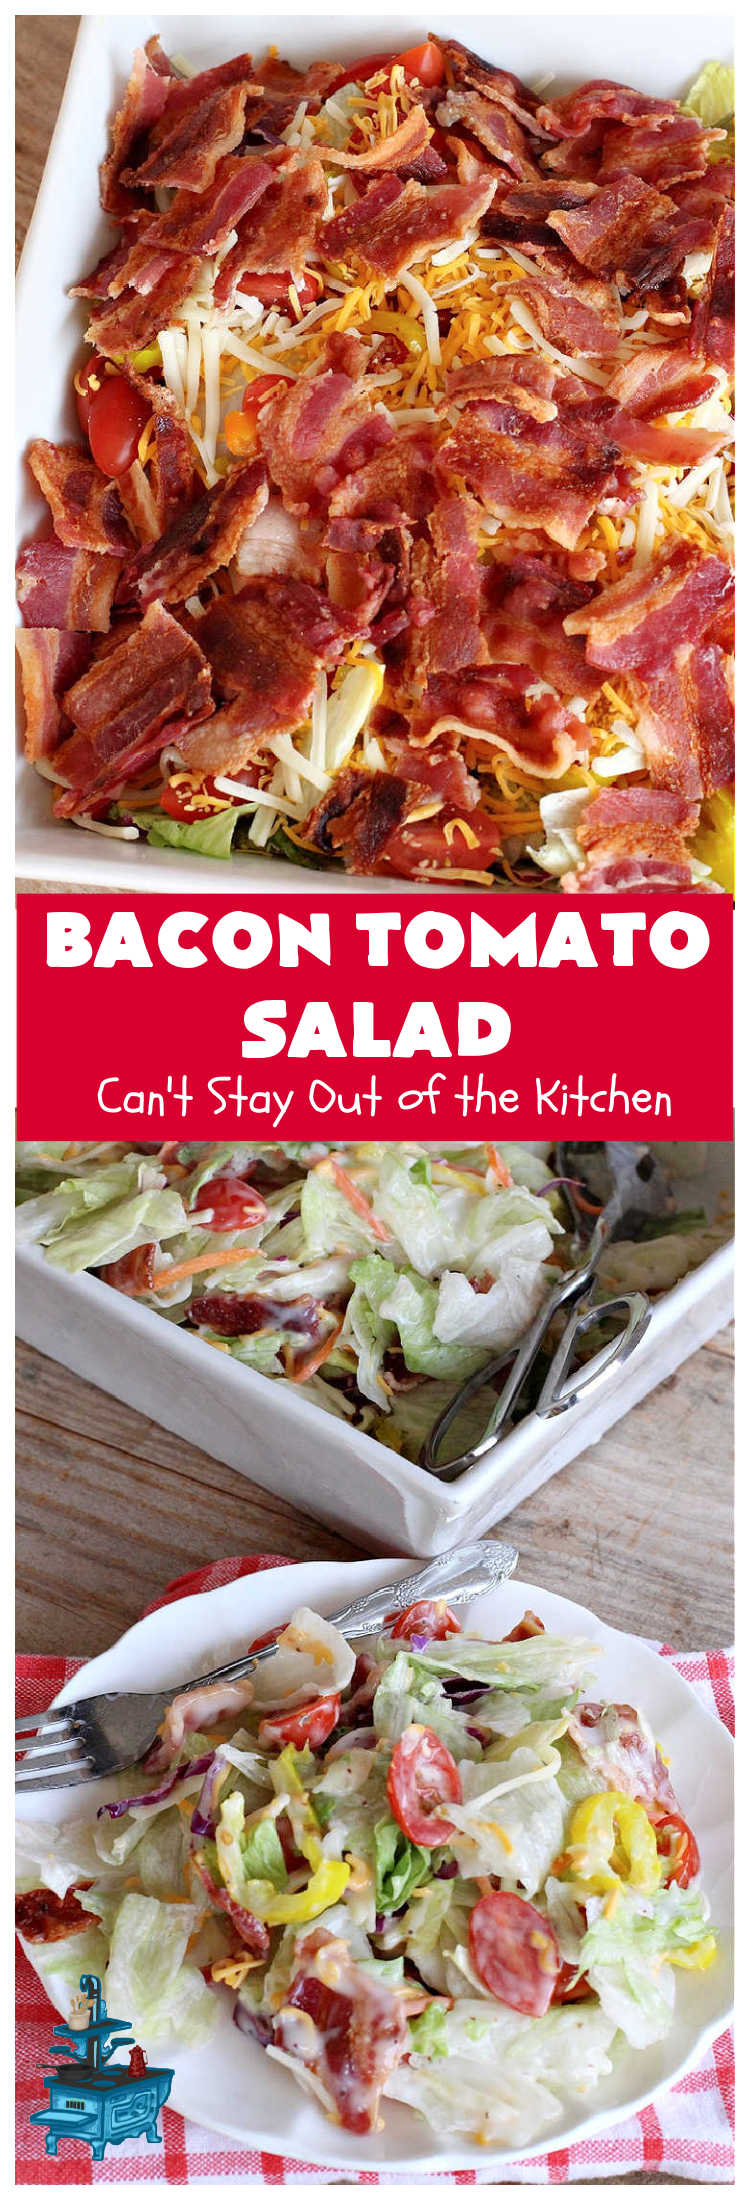 Bacon Tomato Salad | Can't Stay Out of the Kitchen